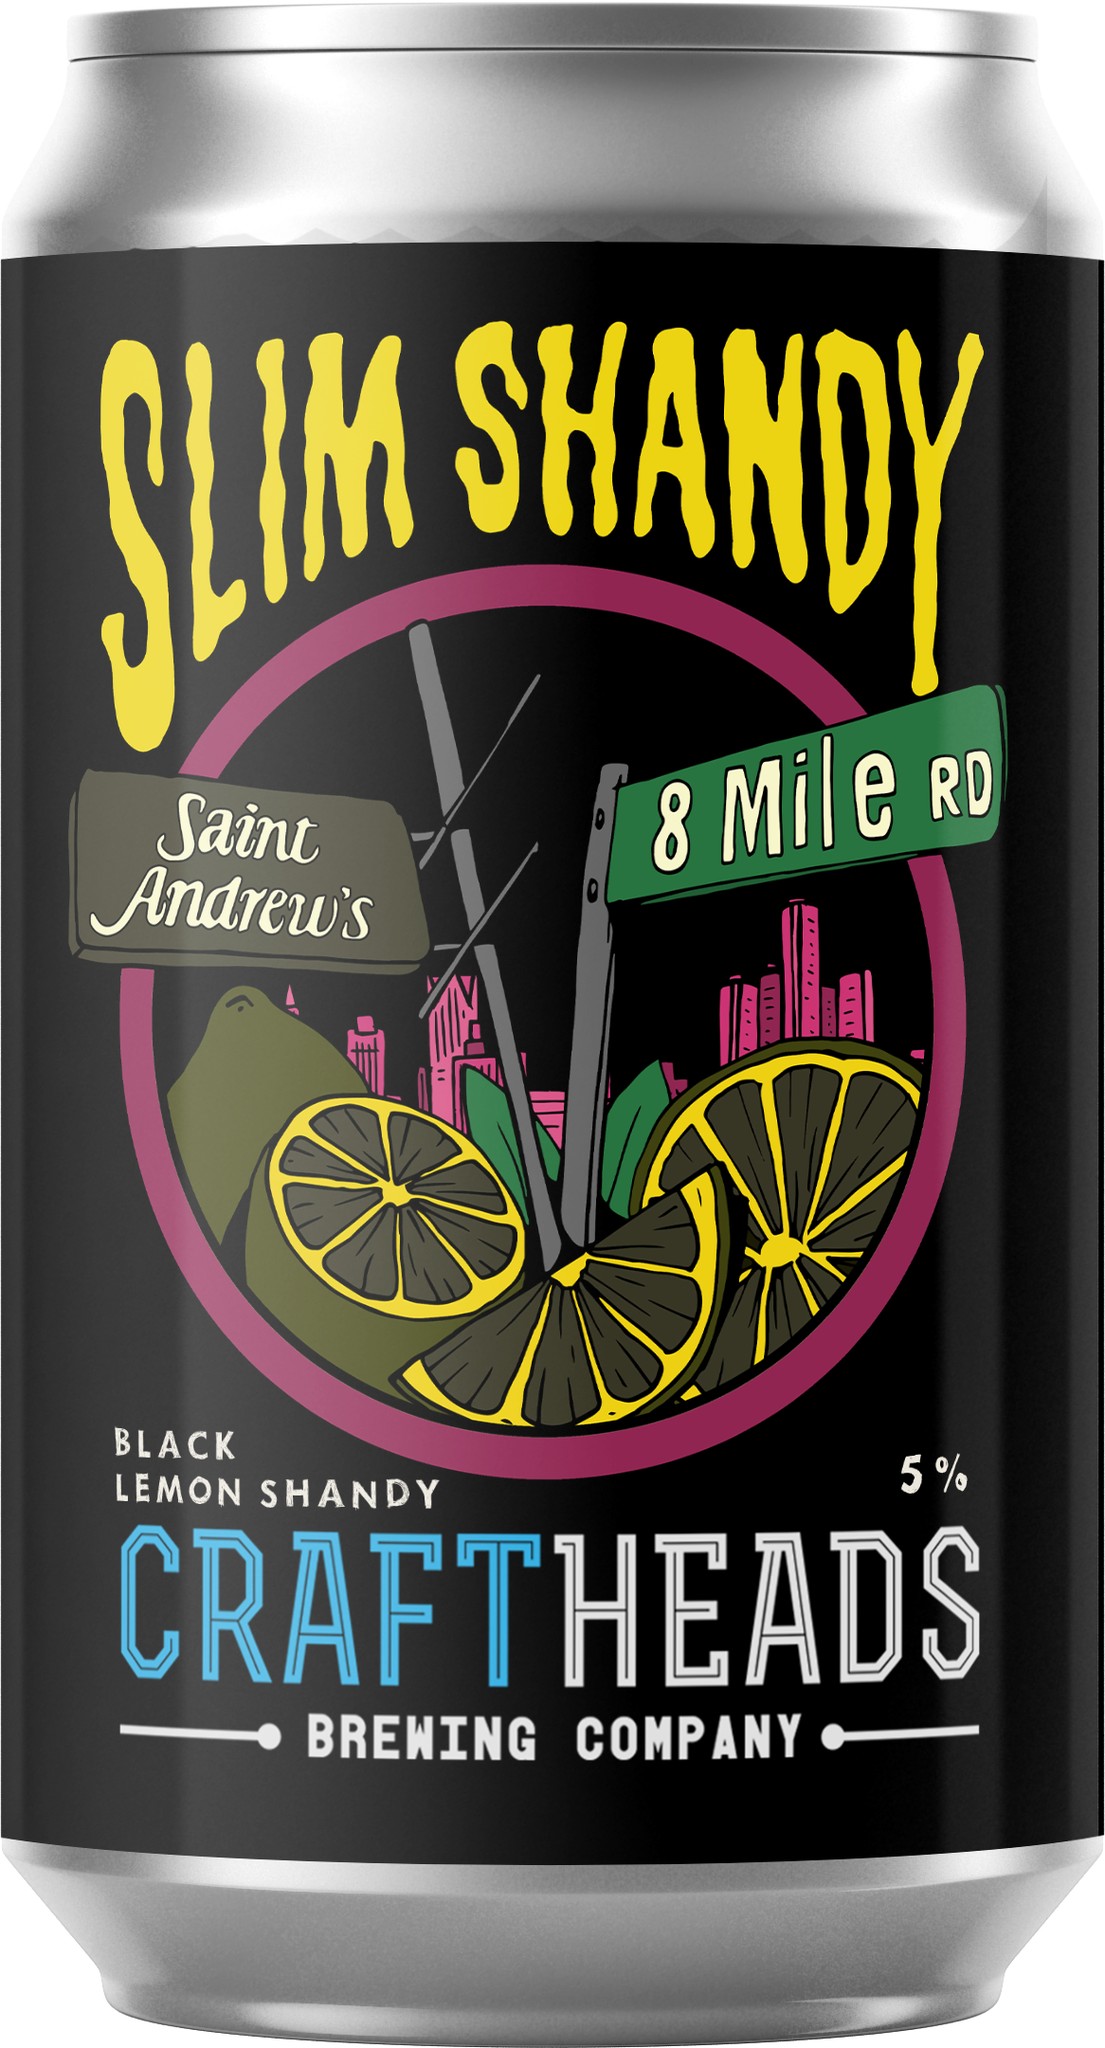 The Slim Shandy from Craft Heads Brewing Company in Windsor, Ontario.